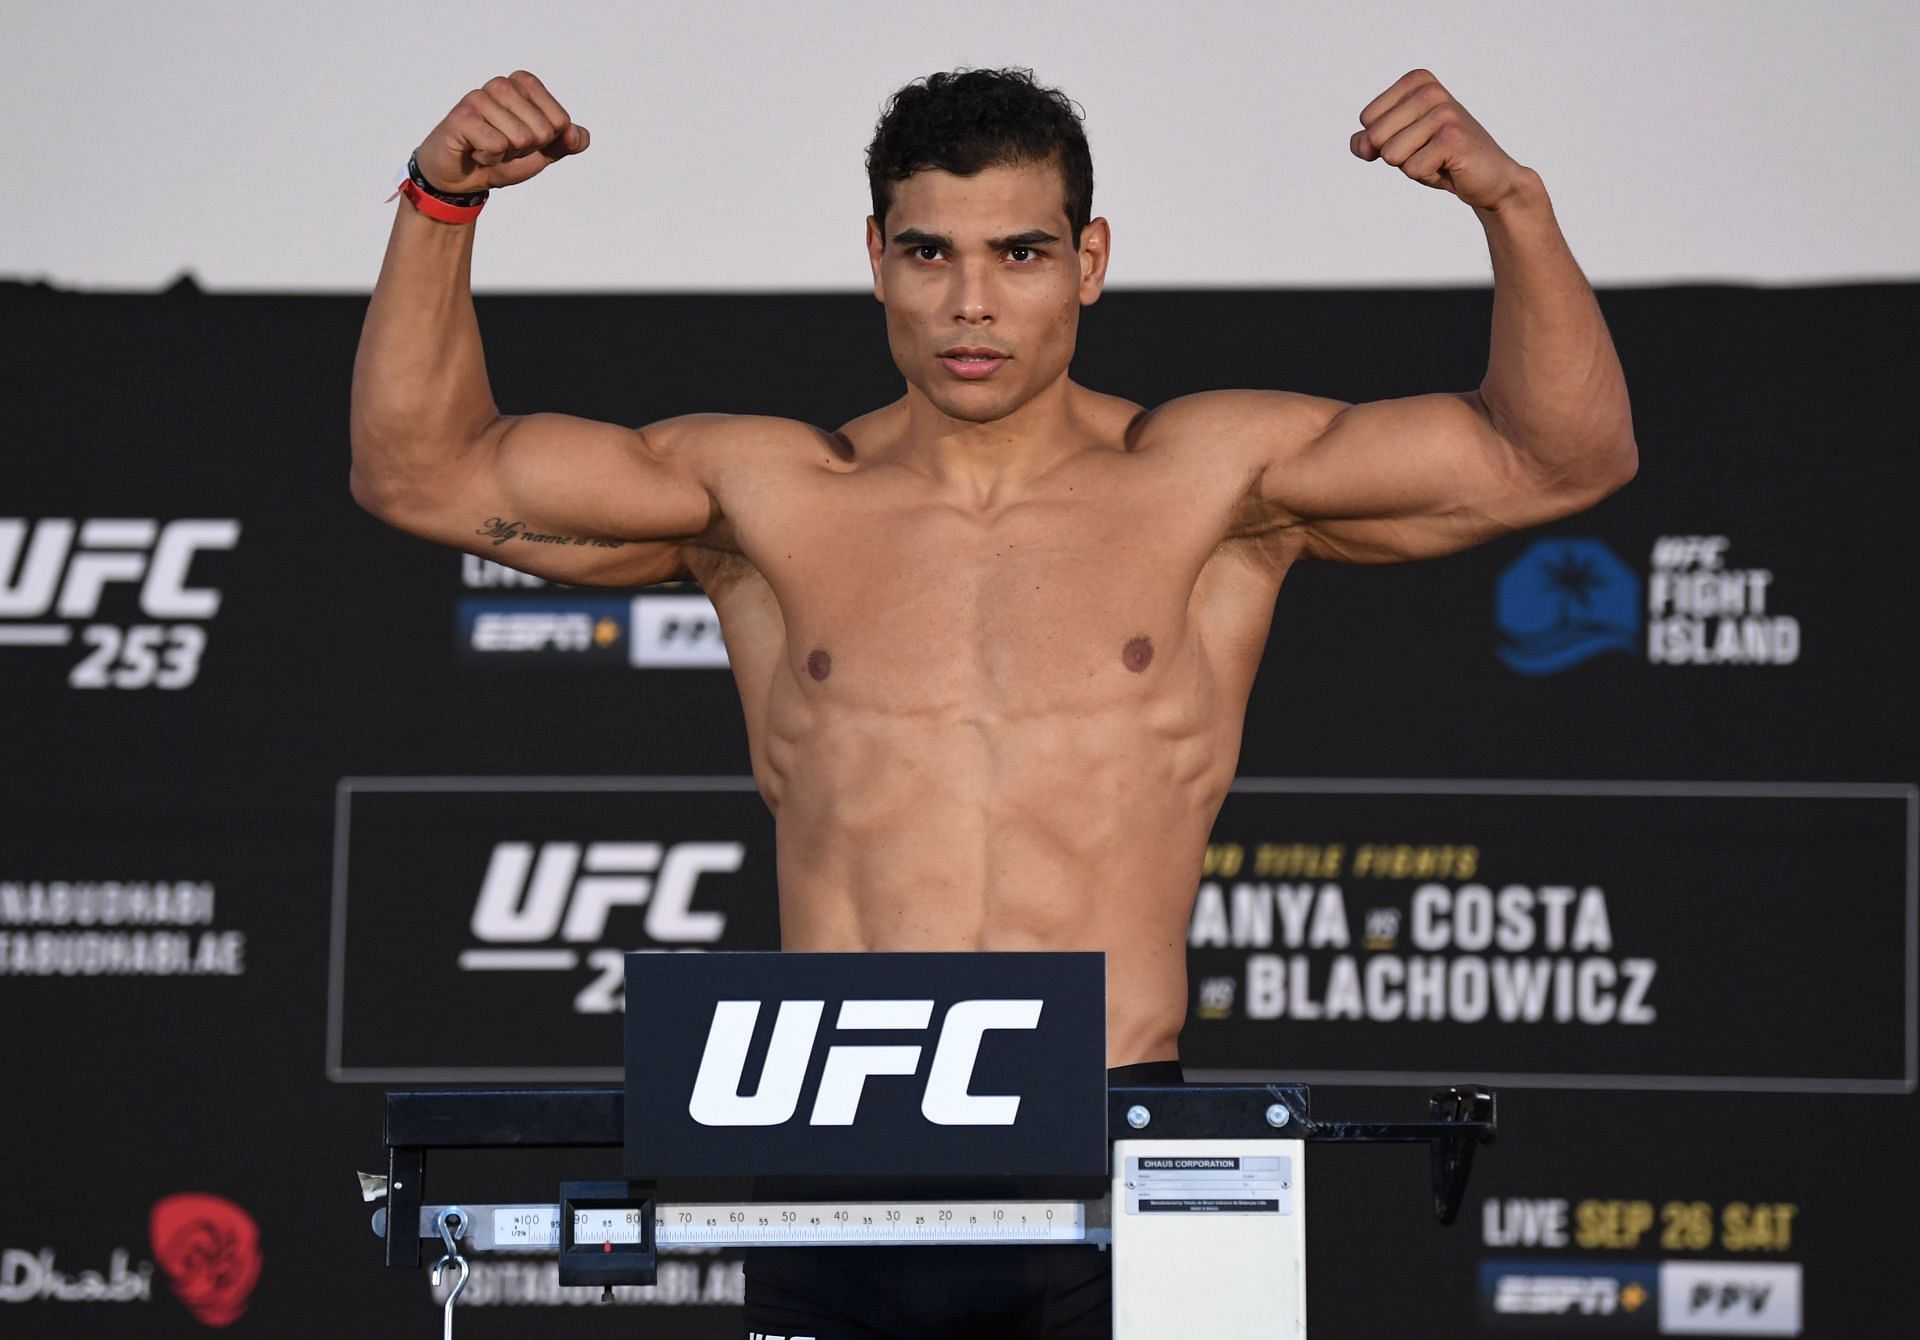 Paulo Costa at flexes for the camera at UFC 253: Weigh-Ins